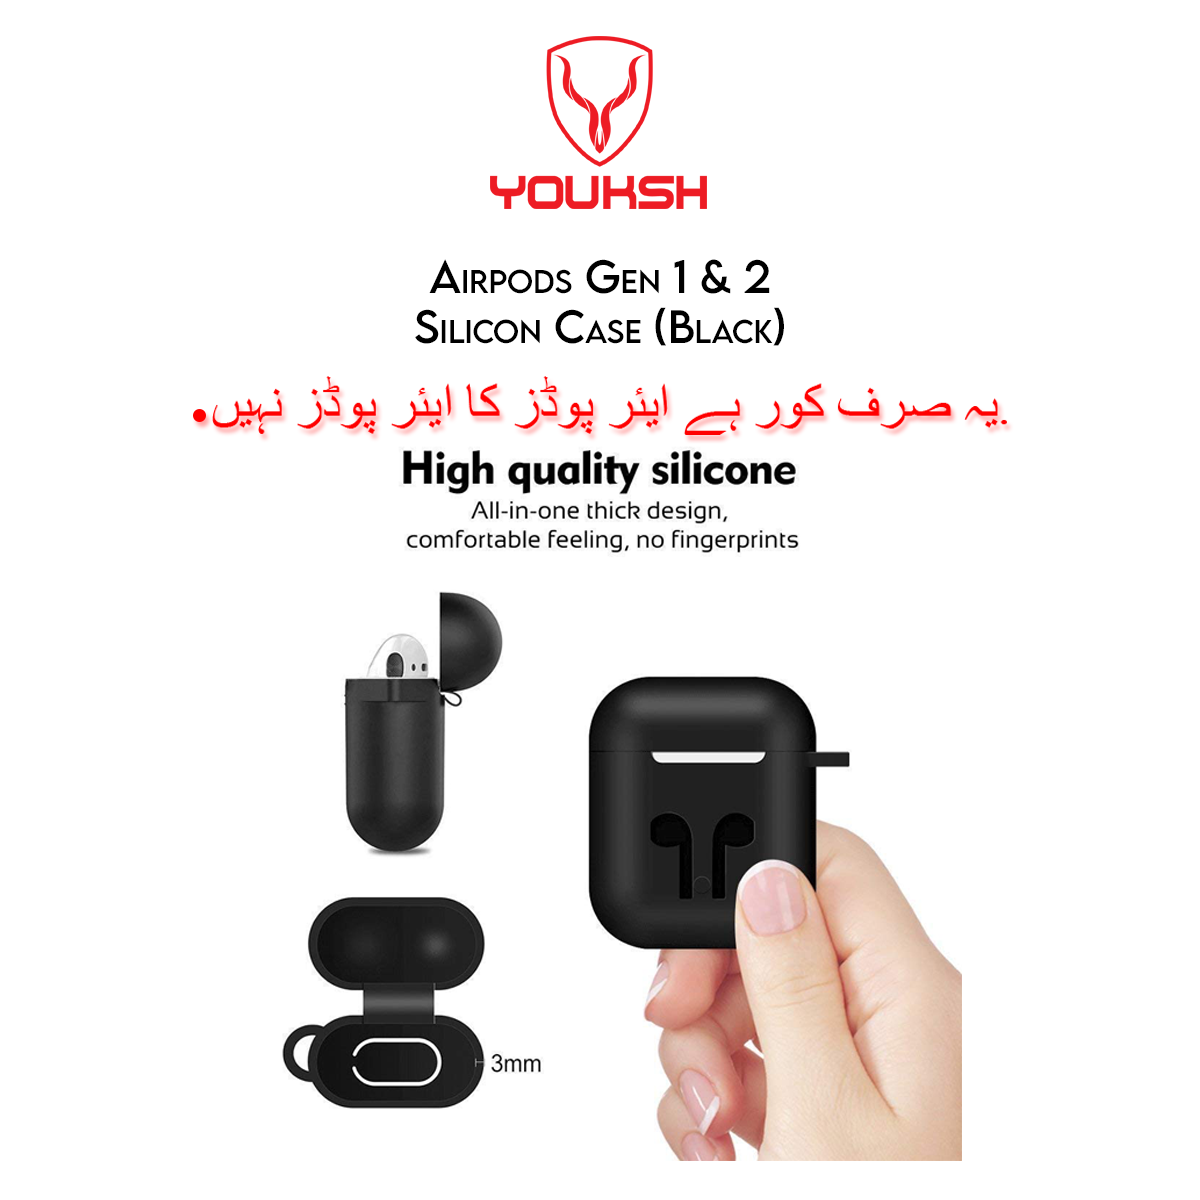 YOUKSH Apple Airpods (Series 1 & 2) Silicone Case - Apple Airpods (Series 1 & 2) Silicone Case - Airpods (Series 1 & 2) Silicone Rubber Cover - High Quality Shock Proof Case Only.